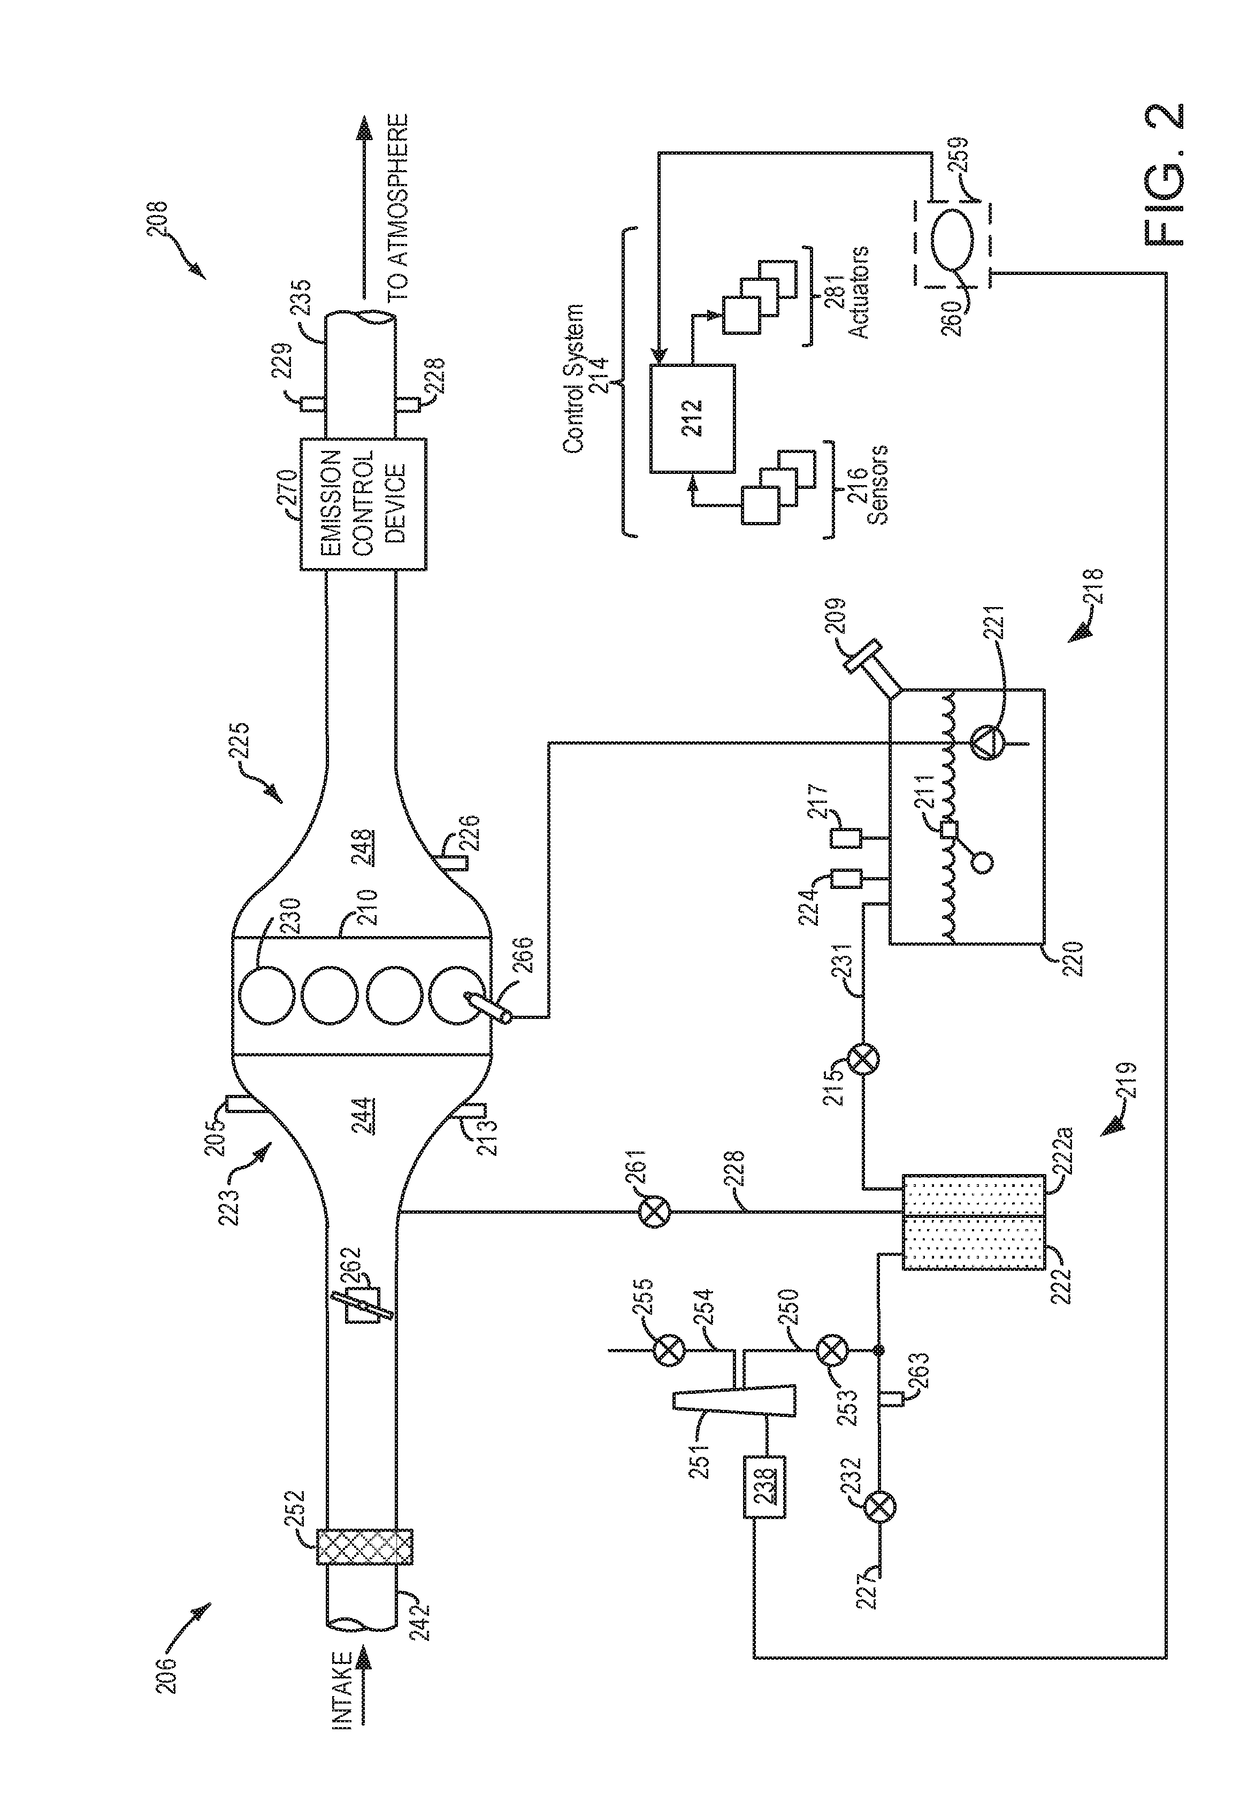 Systems and methods for vehicle evaporative emissions system diagnostics